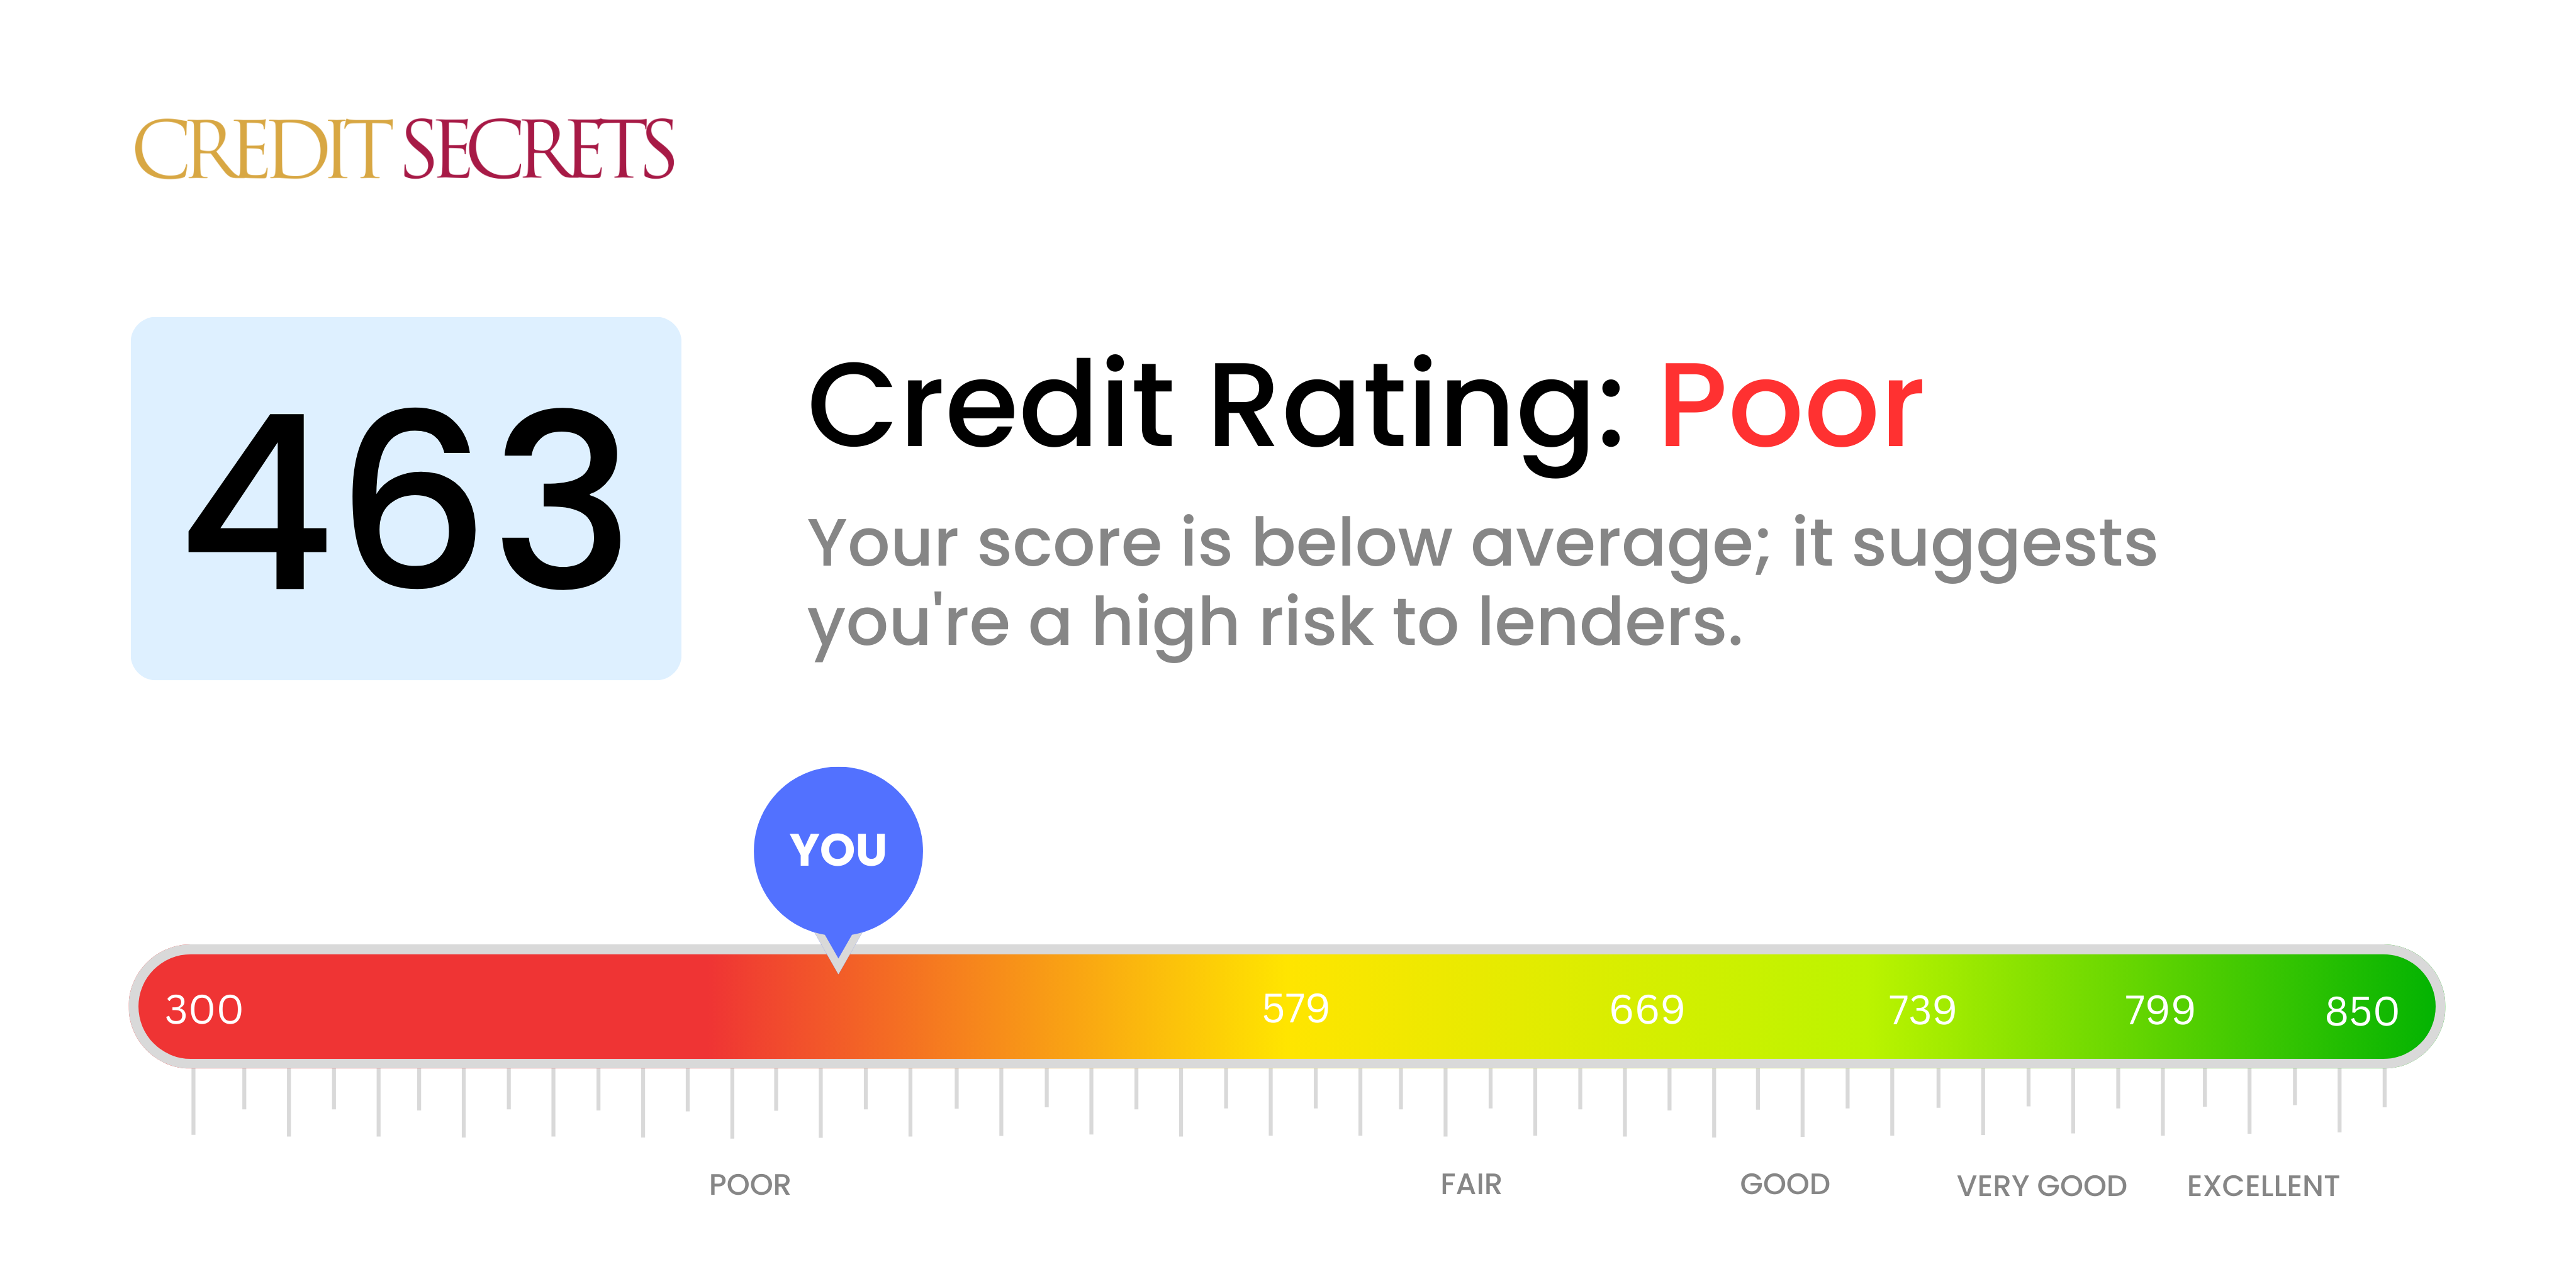 Is 463 a good credit score?